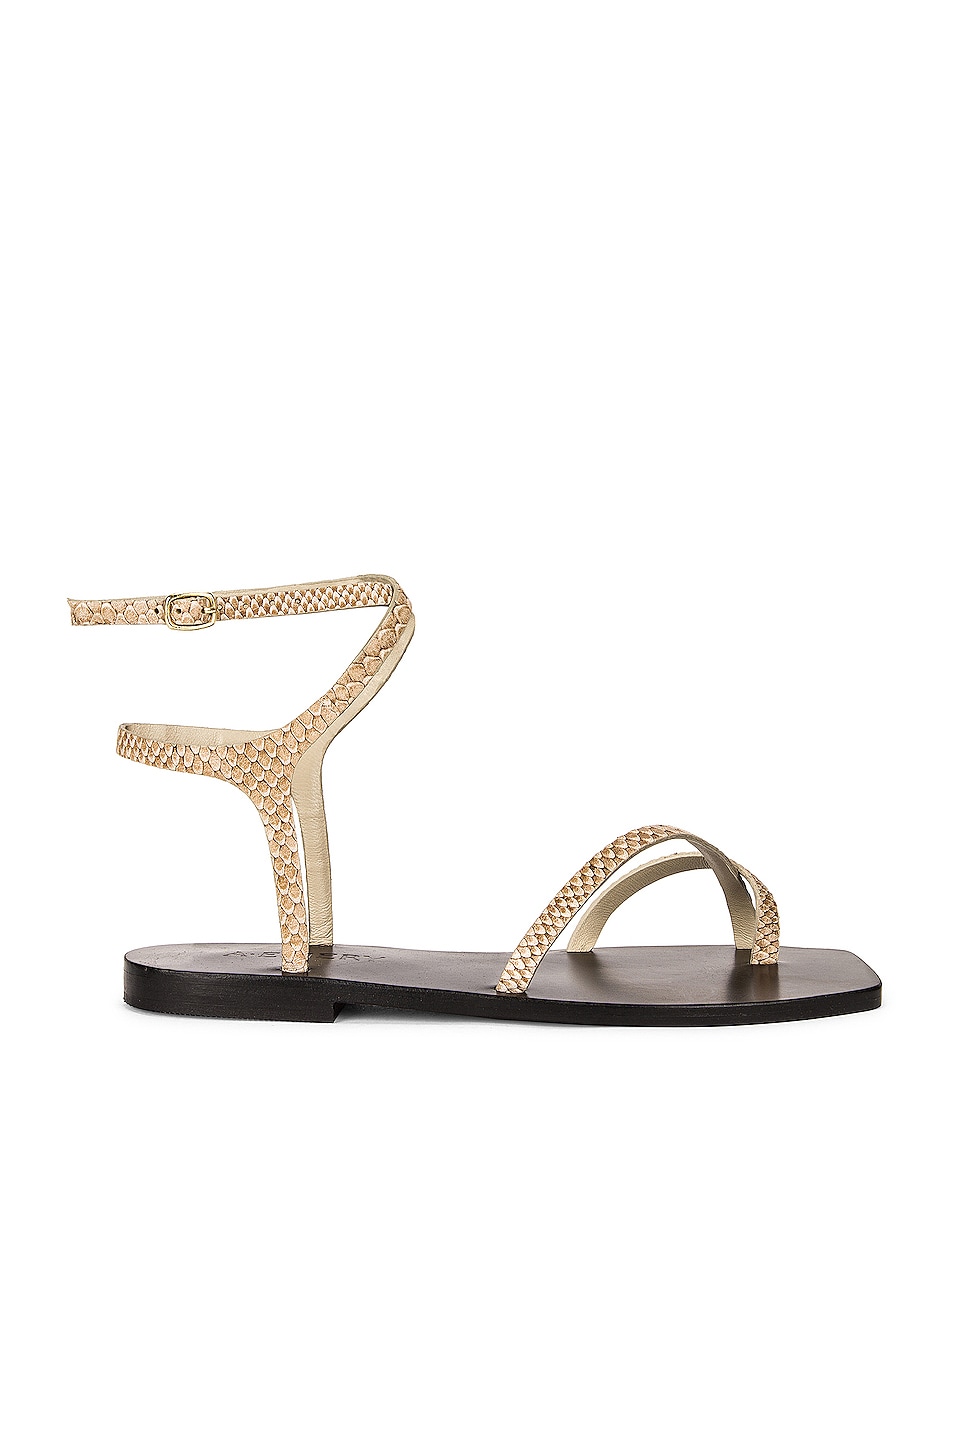 Image 1 of A.EMERY Thia Sandal in Fawn Snake